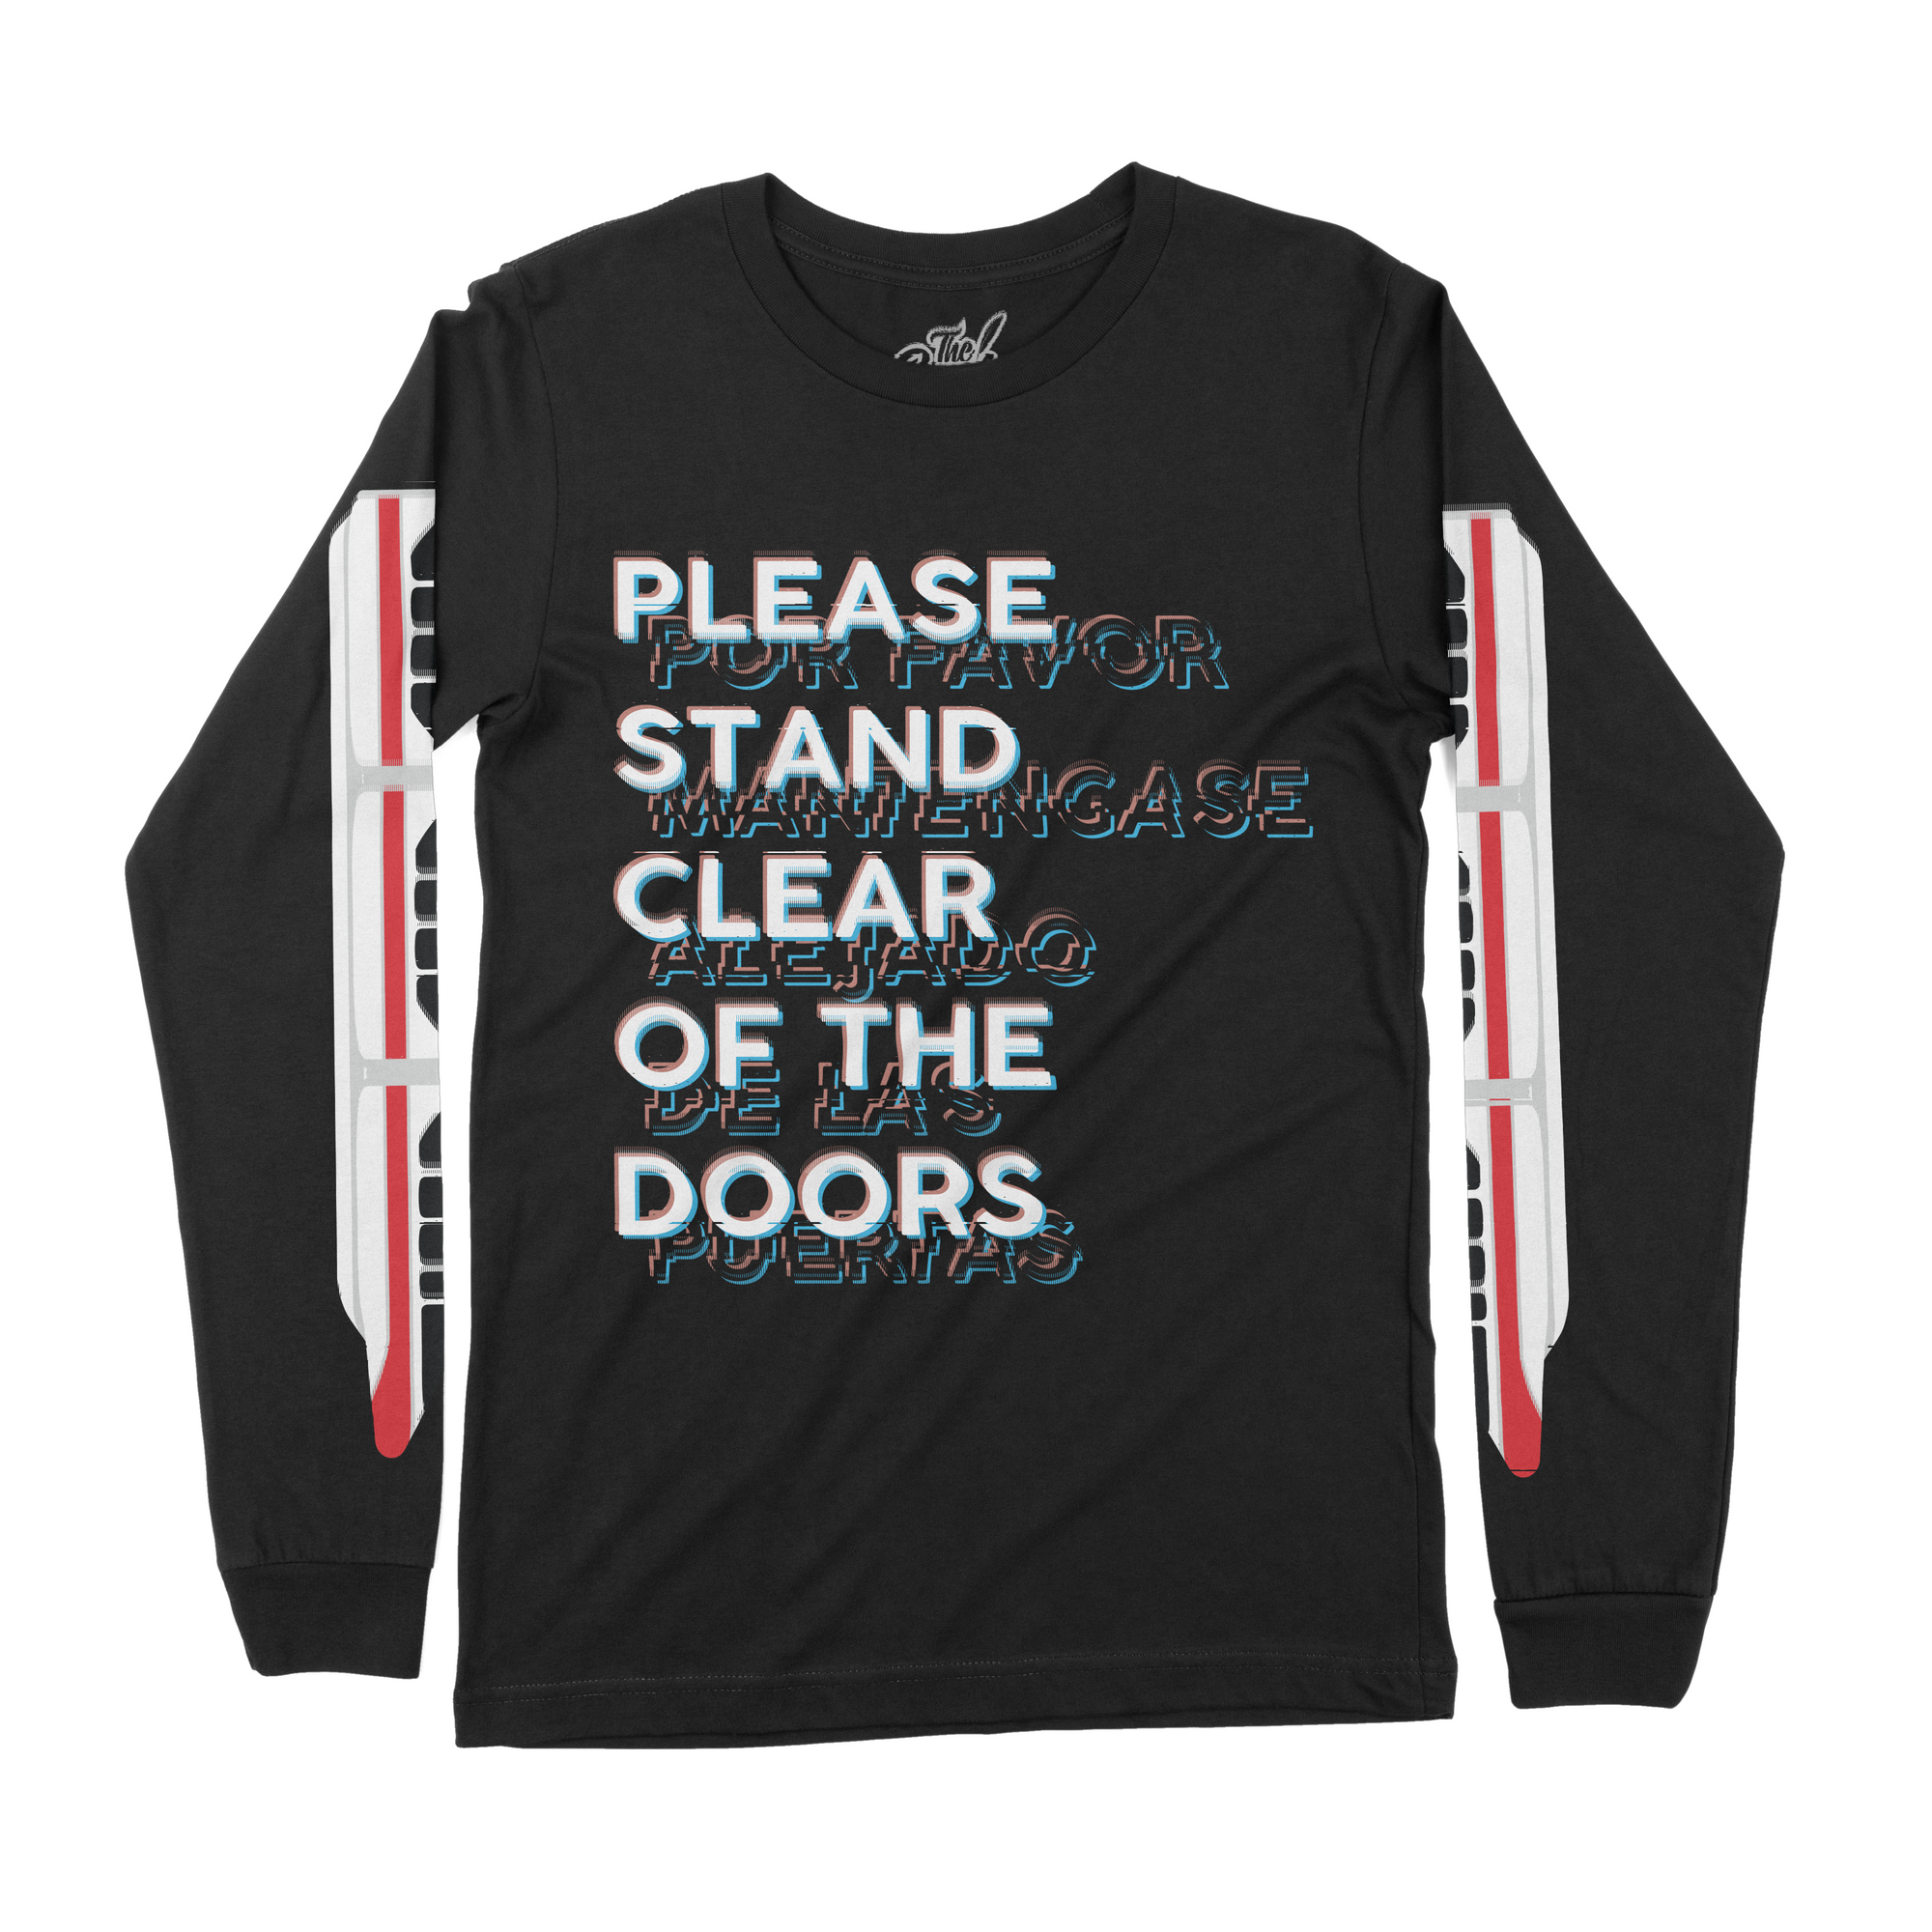 Monorail Long Sleeve Tee The Lost Bros